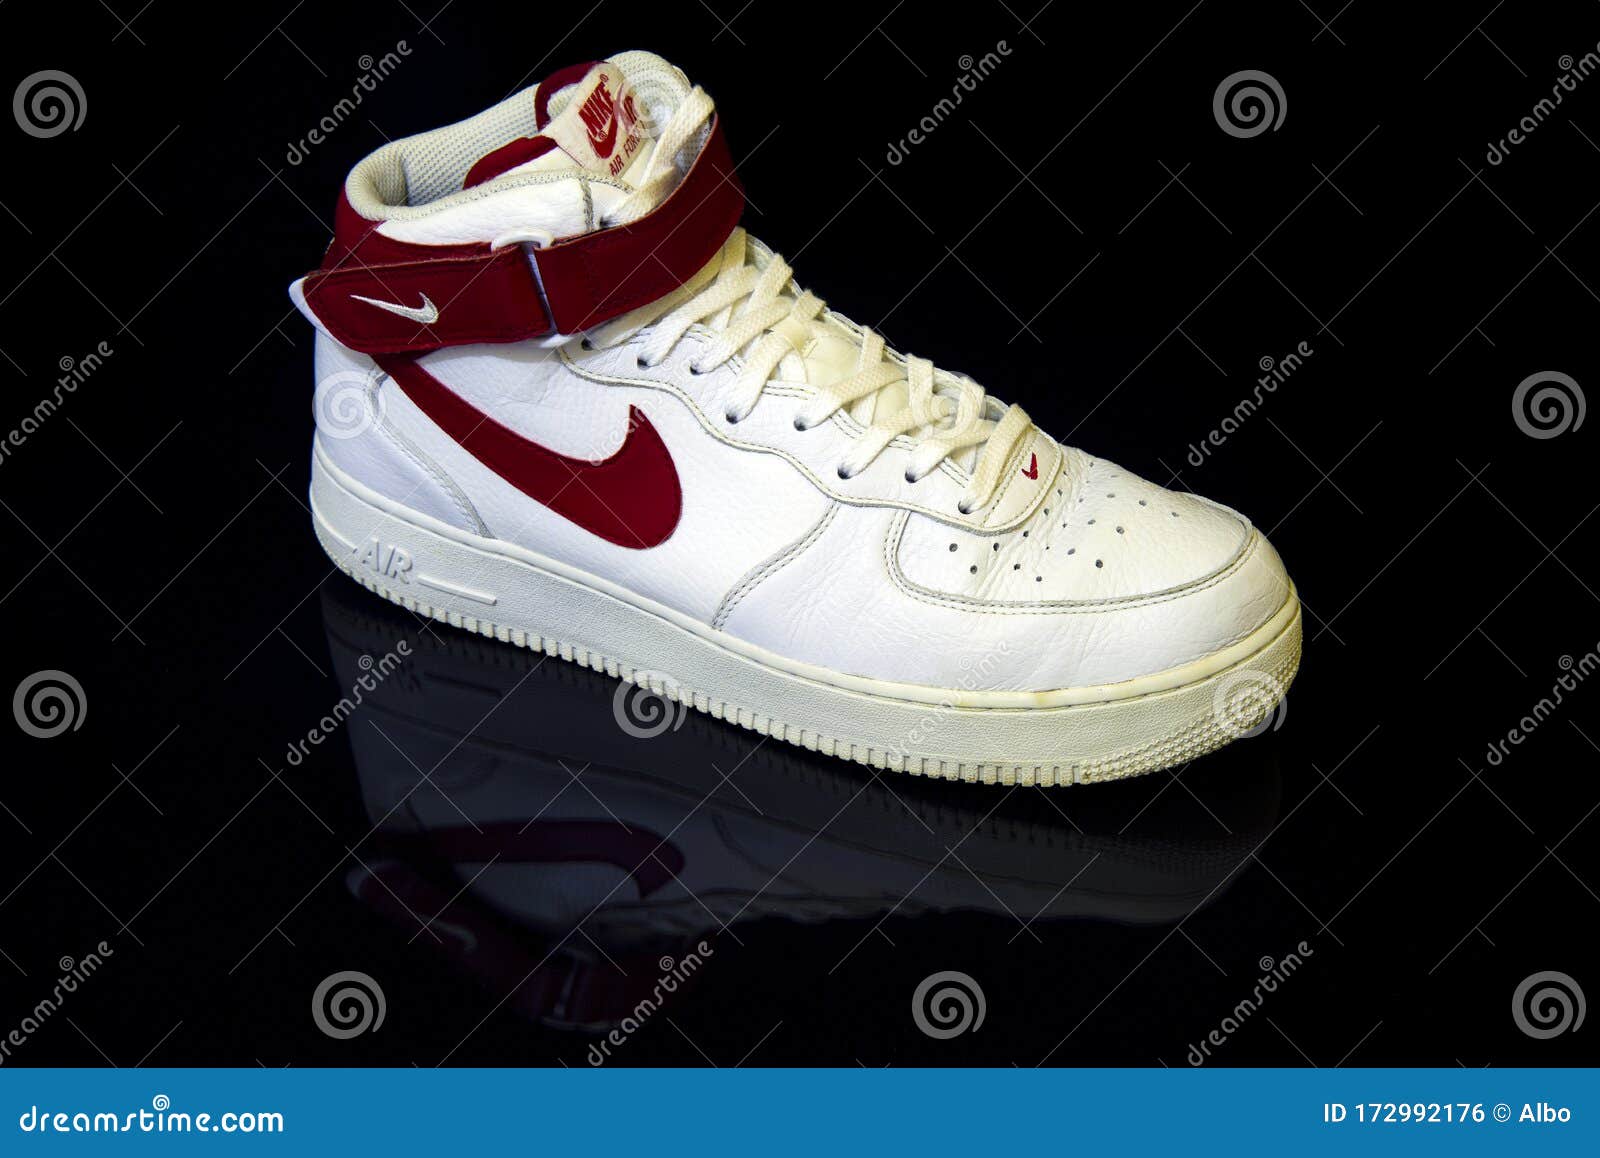 nike air force 1 mid white red